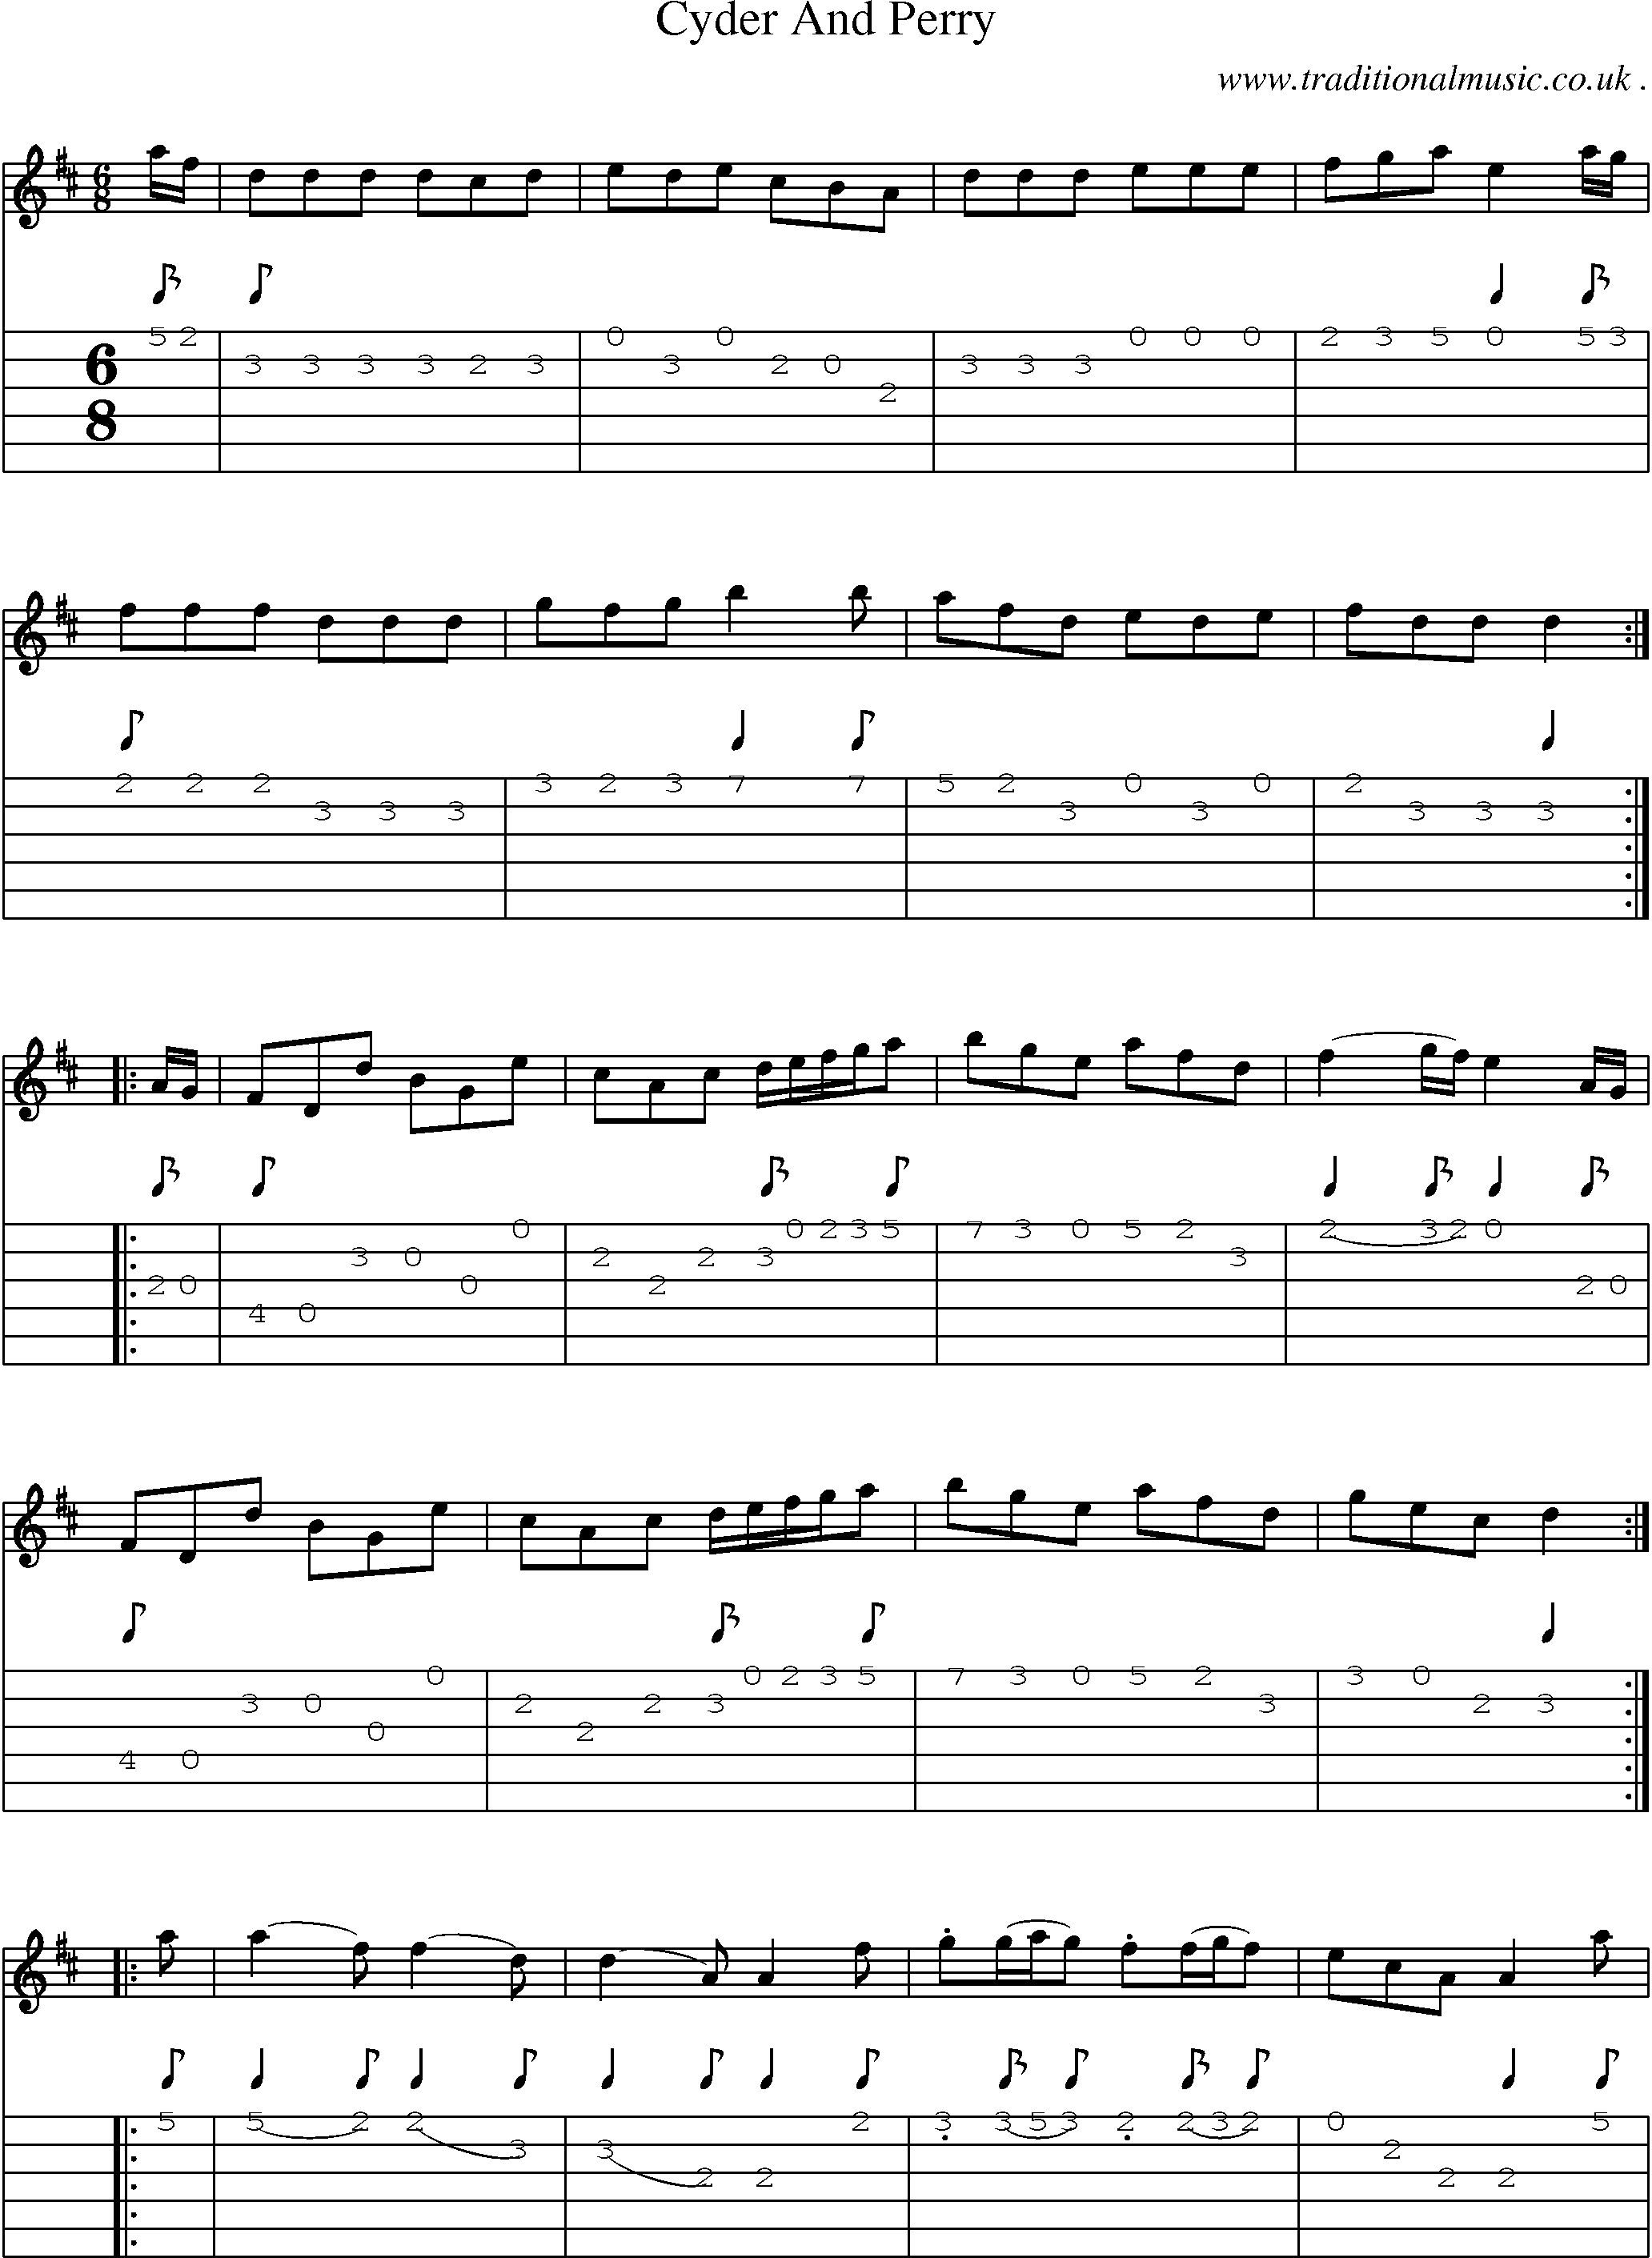 Sheet-Music and Guitar Tabs for Cyder And Perry